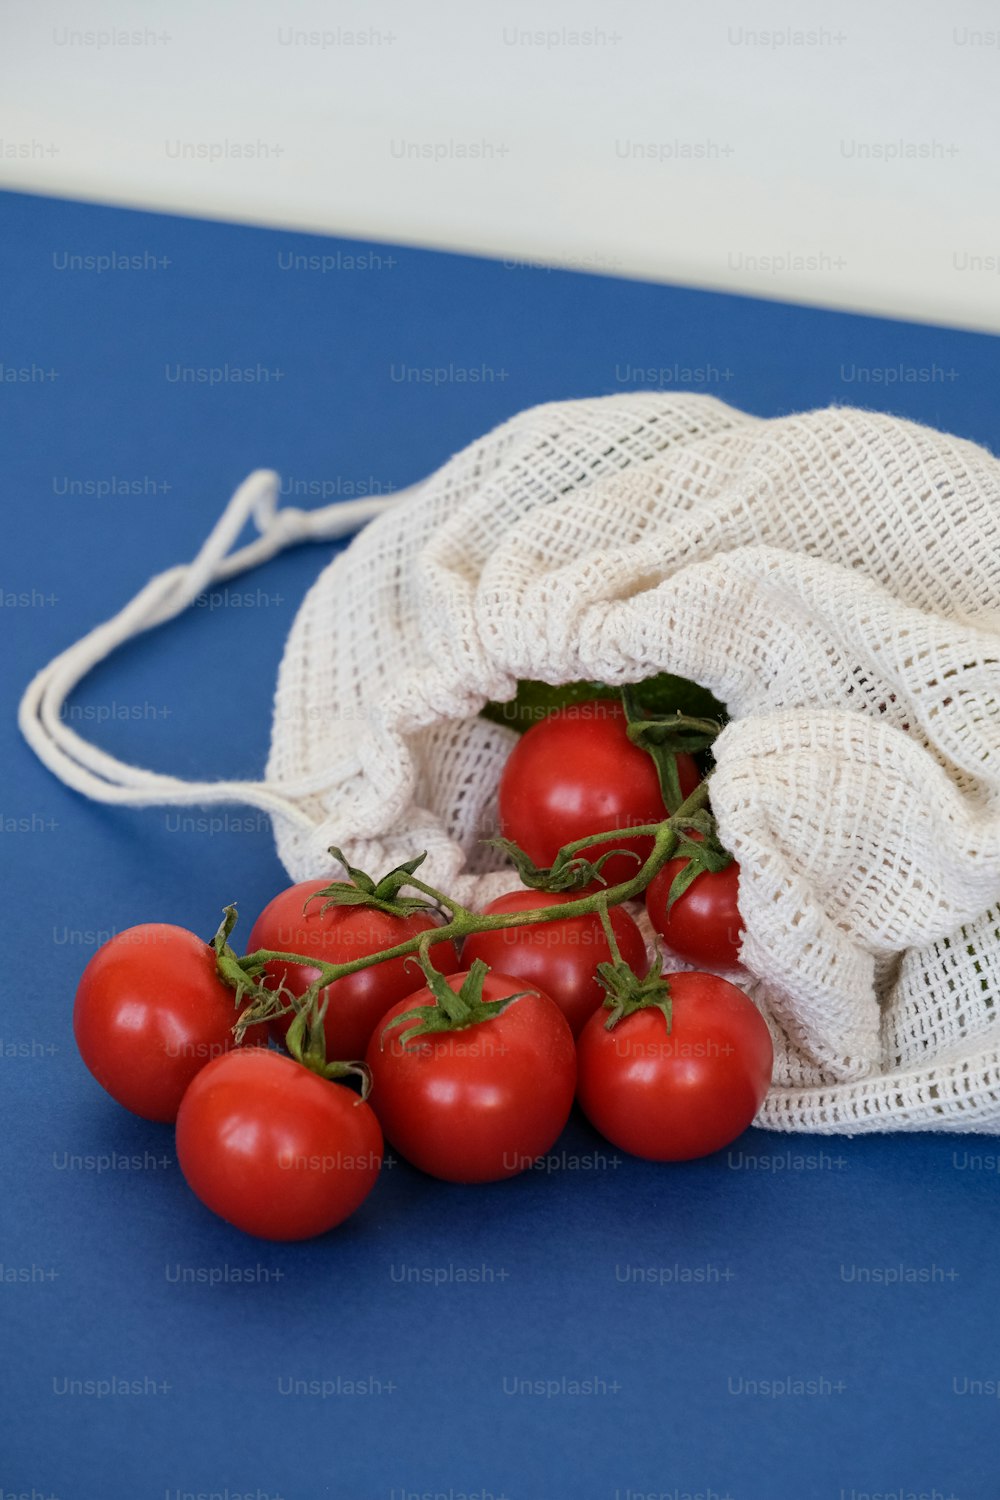 a bag of tomatoes on a blue surface